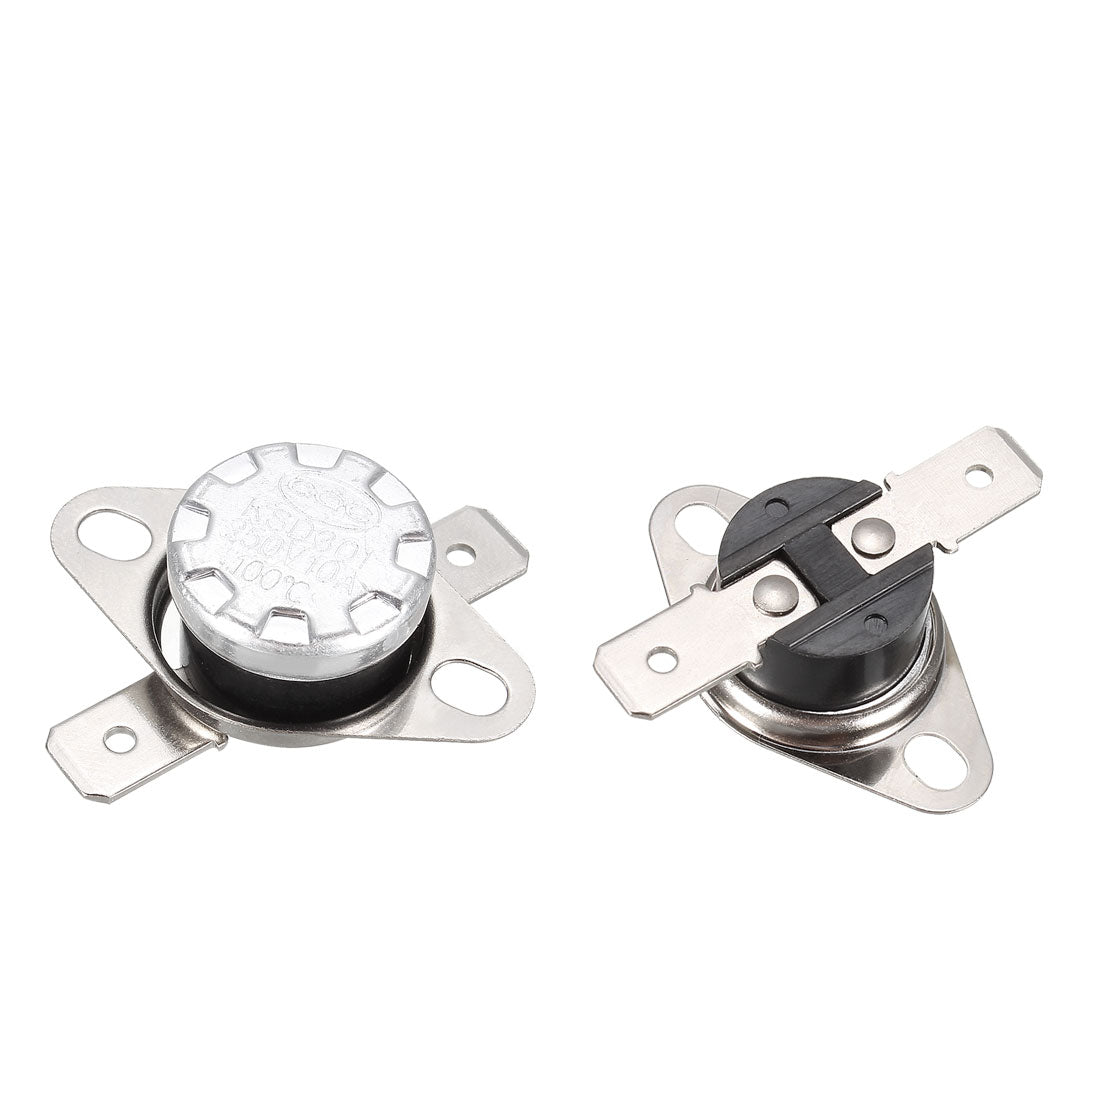 uxcell Uxcell KSD Series Temperature Control Switch Thermostat 100 Celsius N.C 2pcs